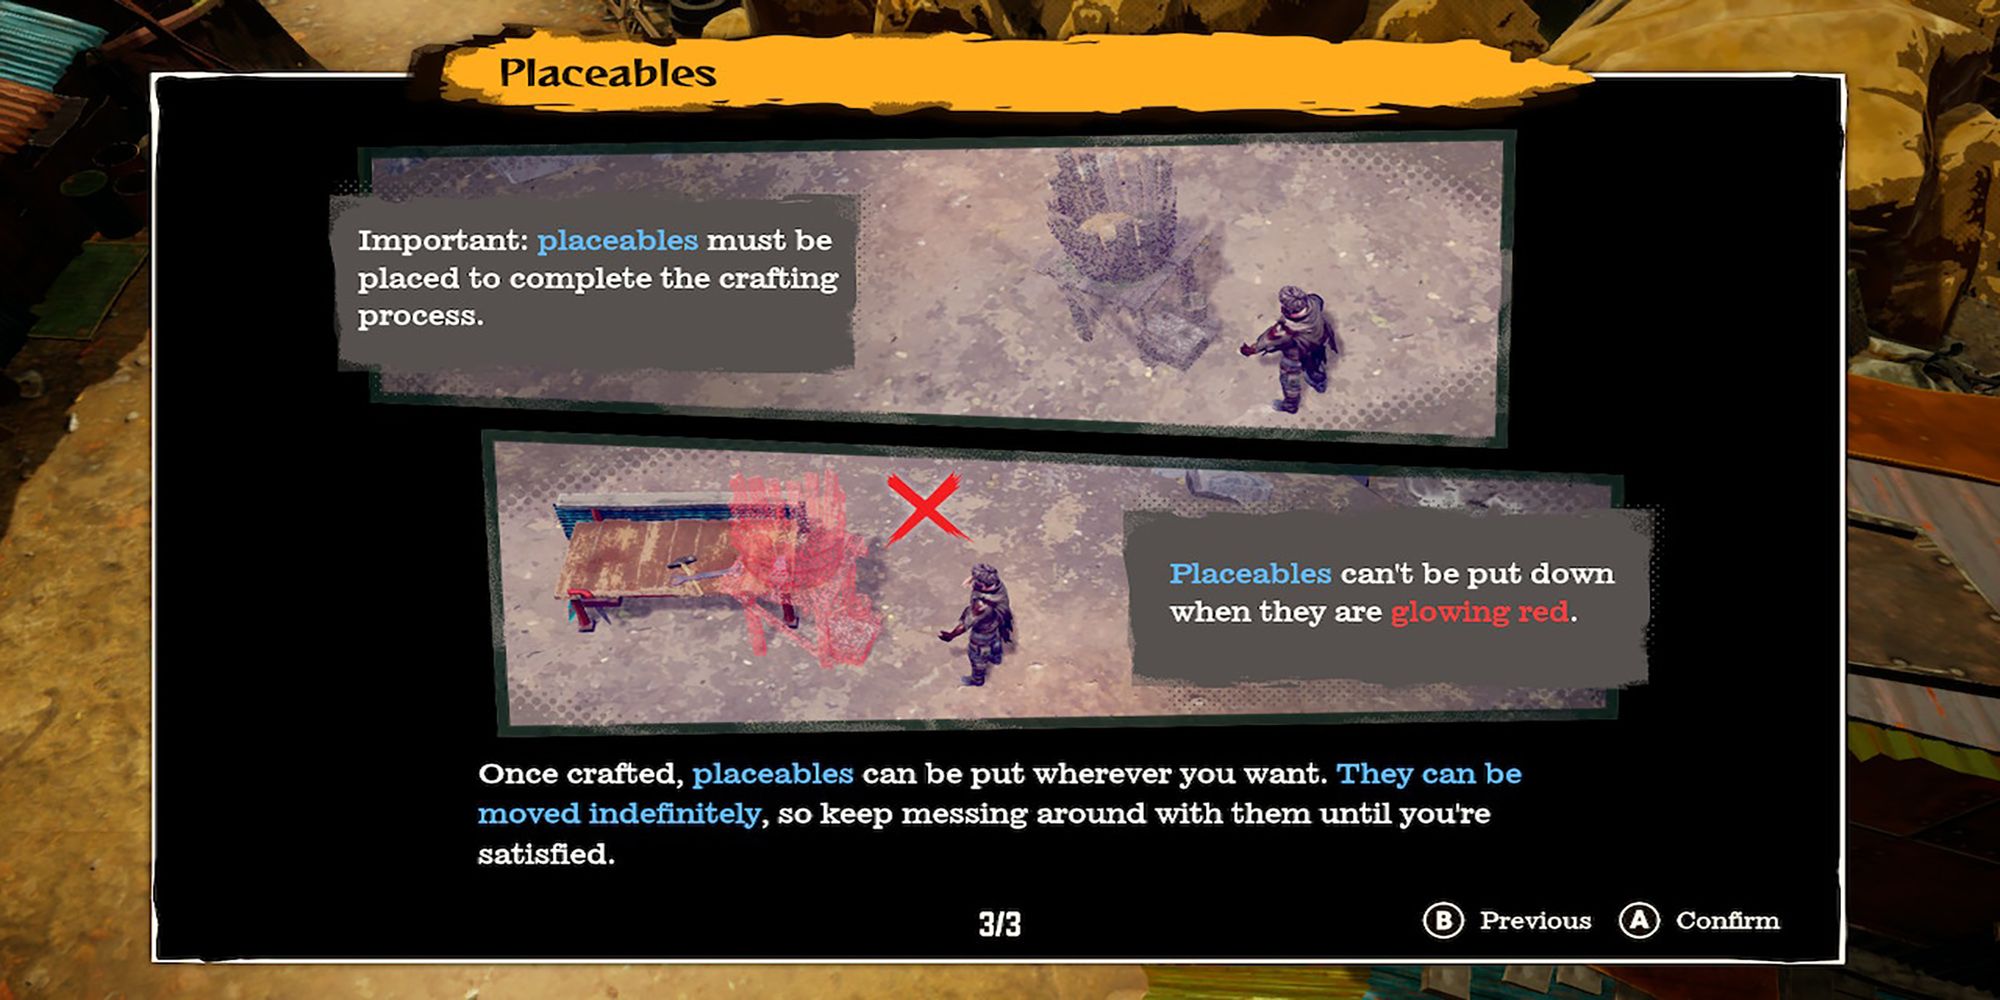 The Placeables tutorial in Deadcraft explains that placeable items must get positioned somewhere before their crafting is complete.